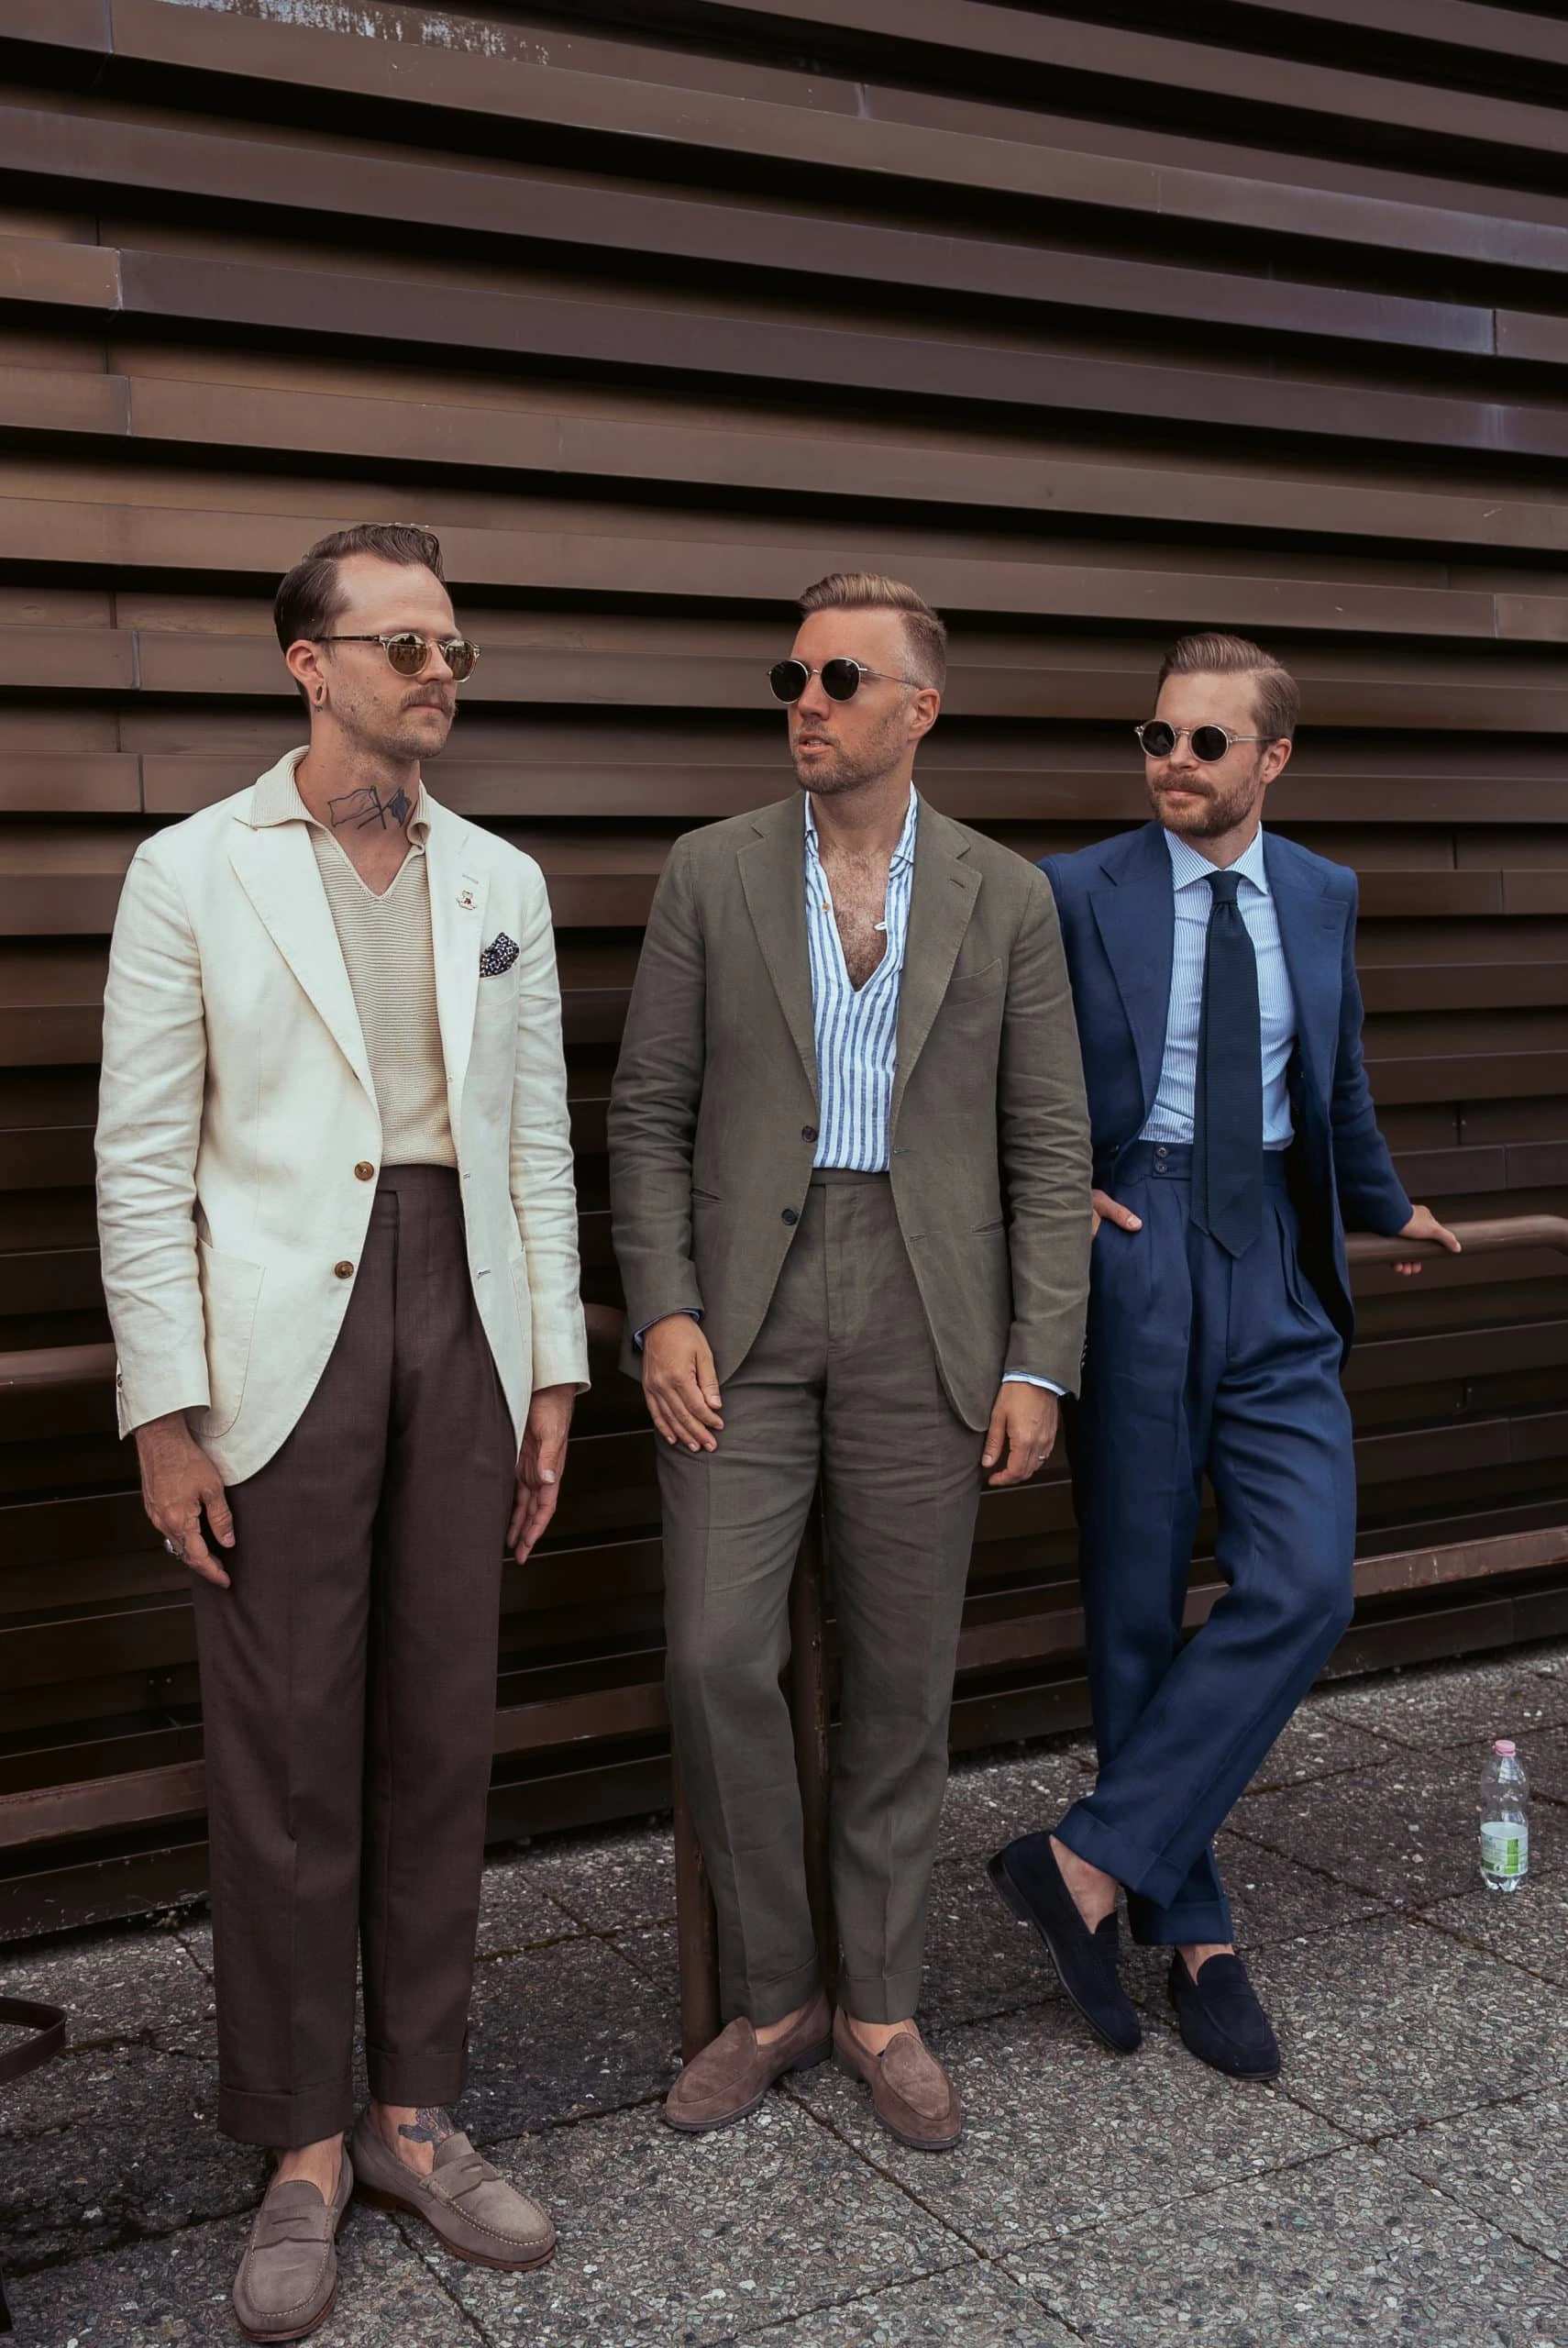 green linen suits and separates worn at pitti uomo